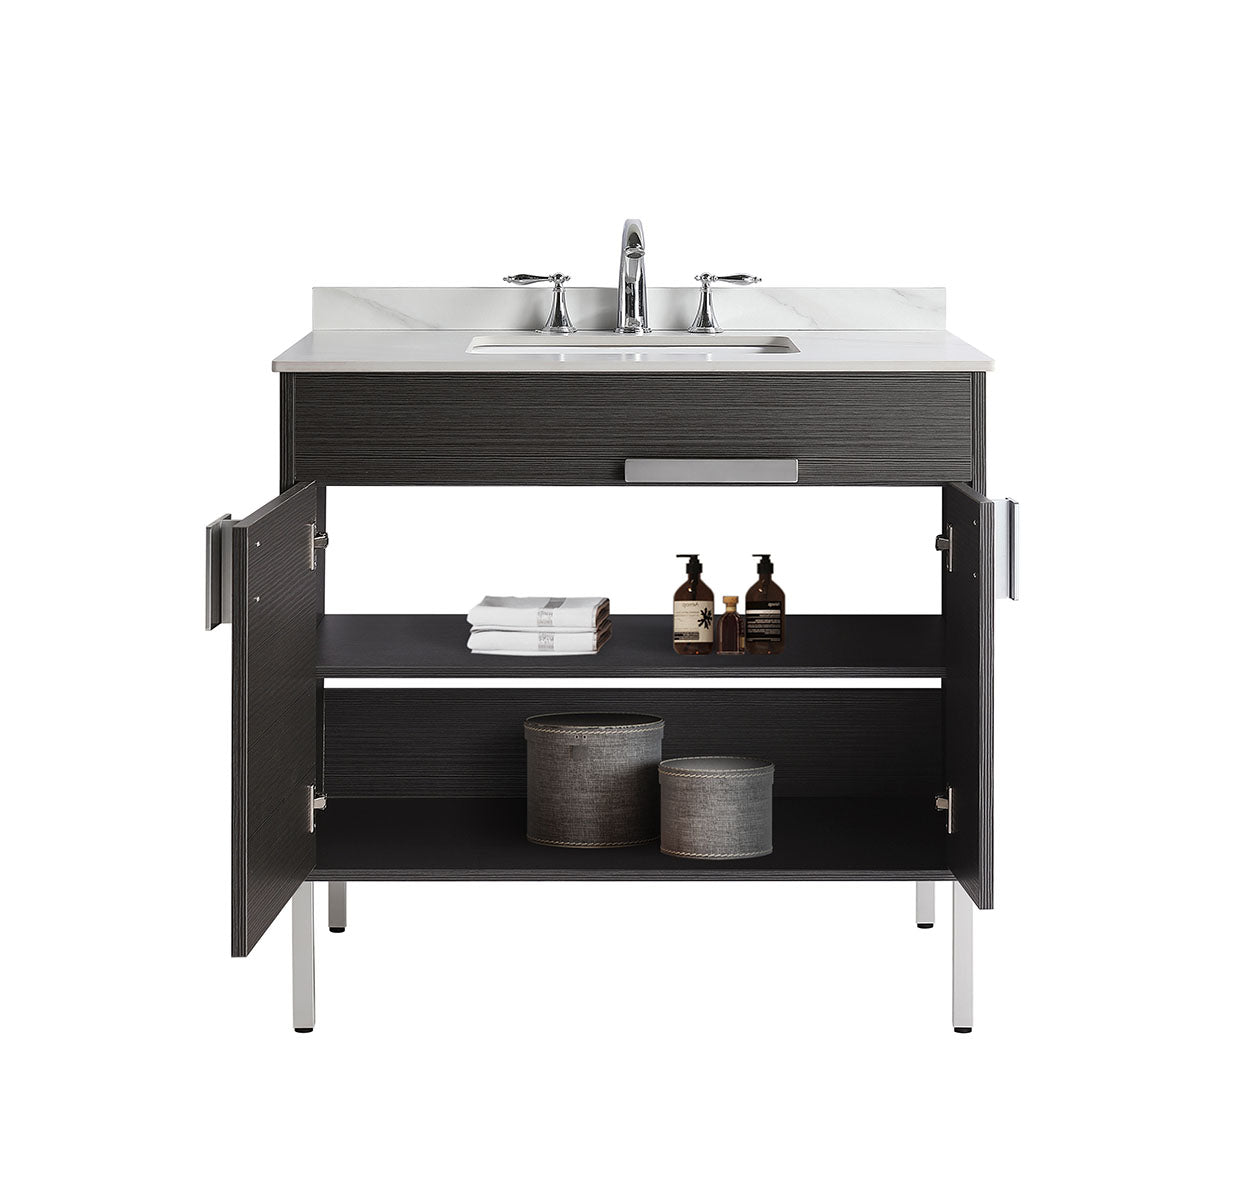 36" Vanity with Sintered Stone Countertop (Charcoal Grey) V9003 Series - iStyle Bath